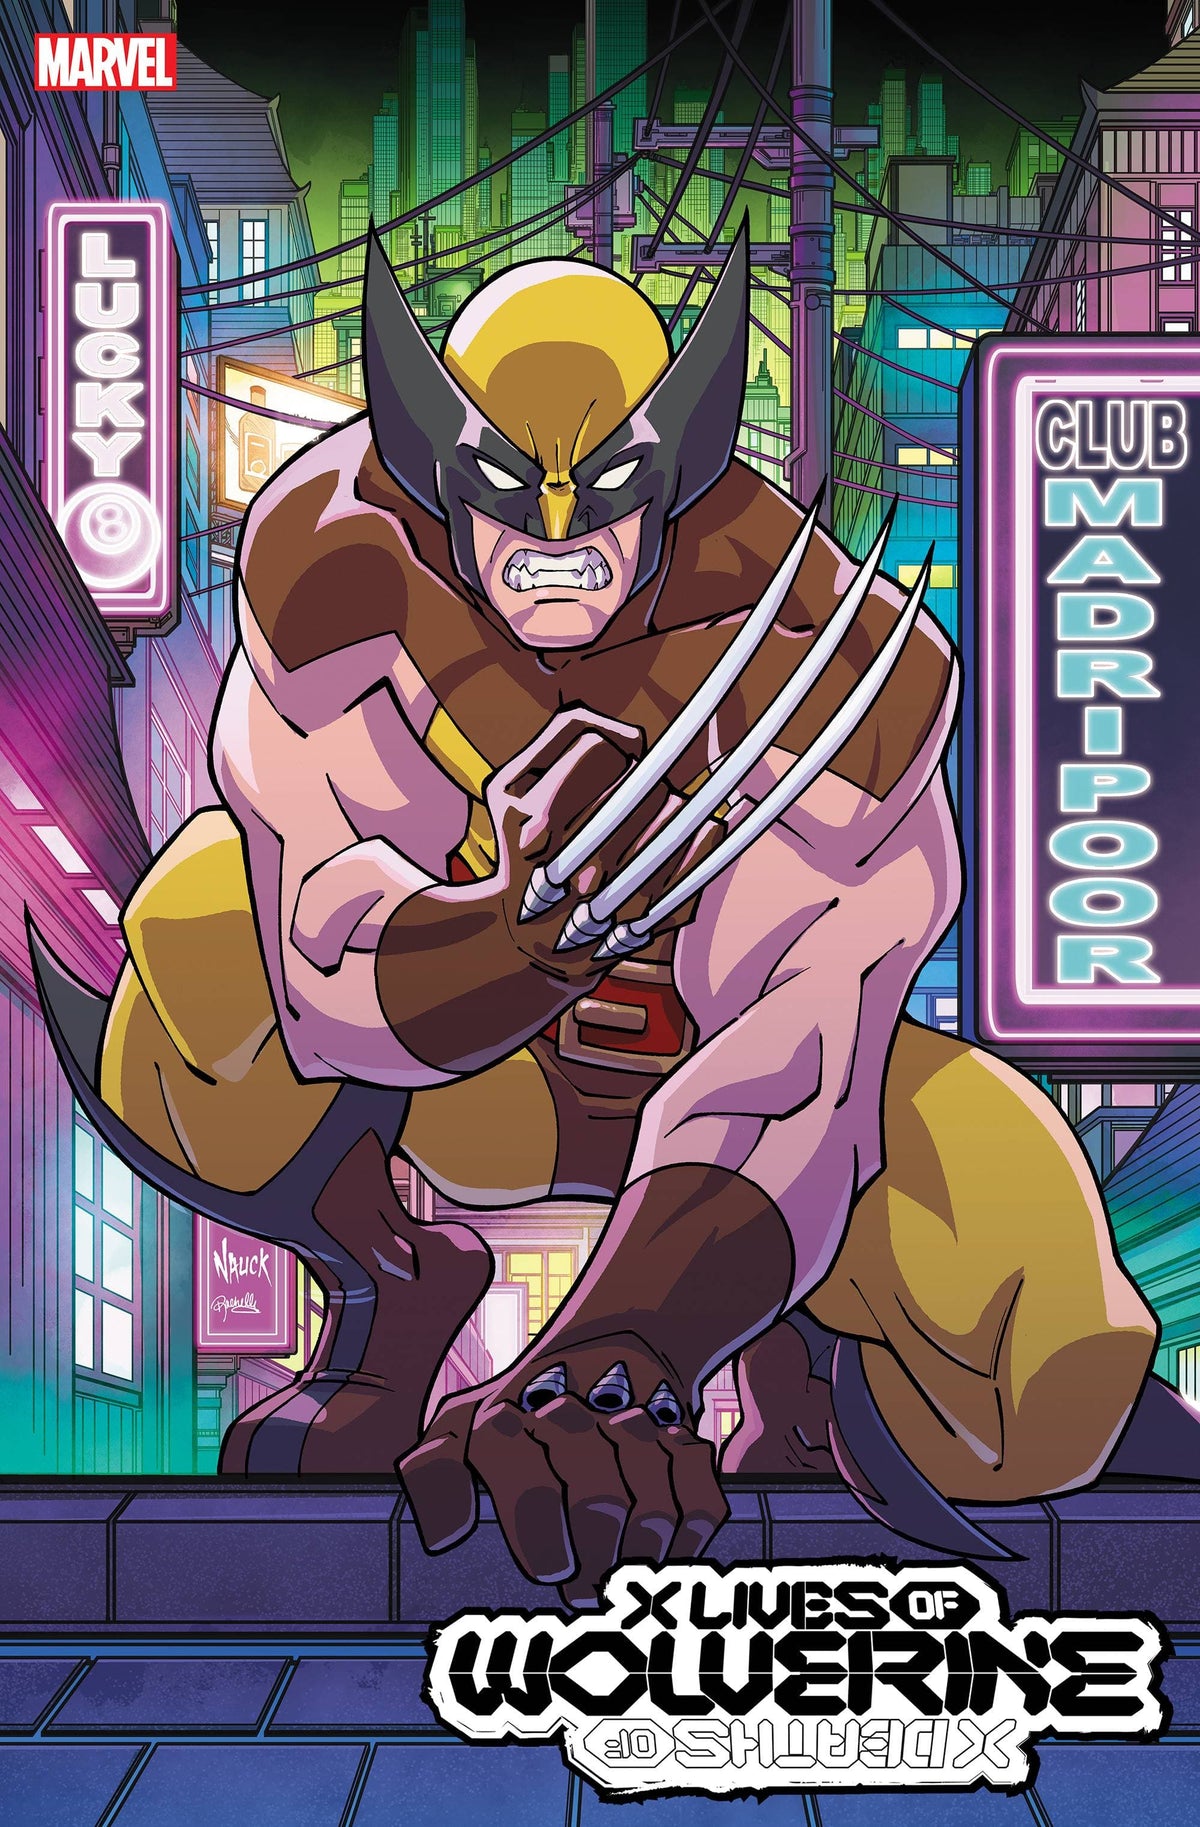 X LIVES OF WOLVERINE #1 1:25 NAUCK ANIMATION STYLE VARIANT - Third Eye